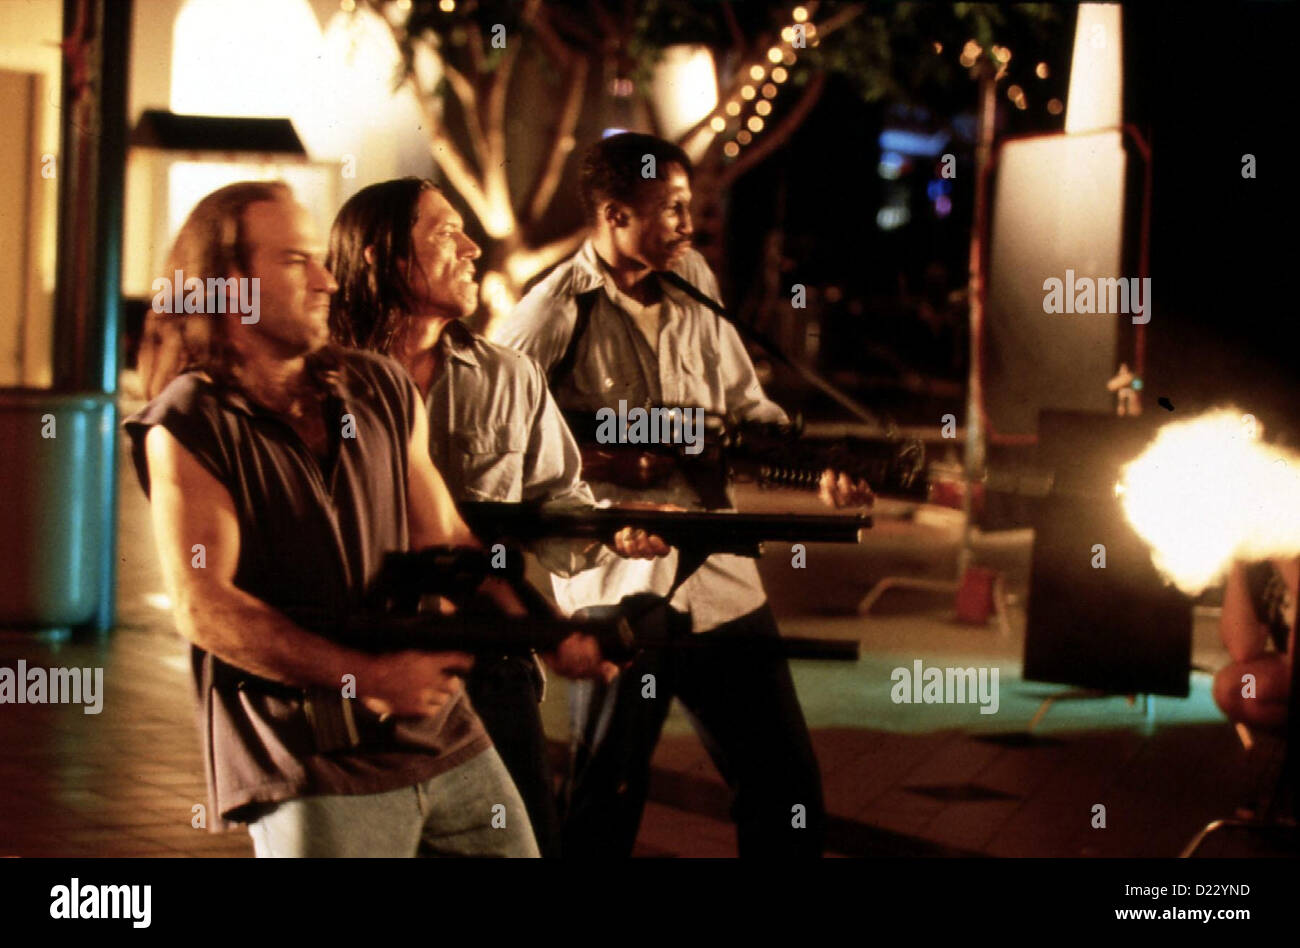 Point Blank - Over And Out   Point Blank   Kevin Gage, Danny Trejo, ? *** Local Caption *** 1997  Interlight Stock Photo